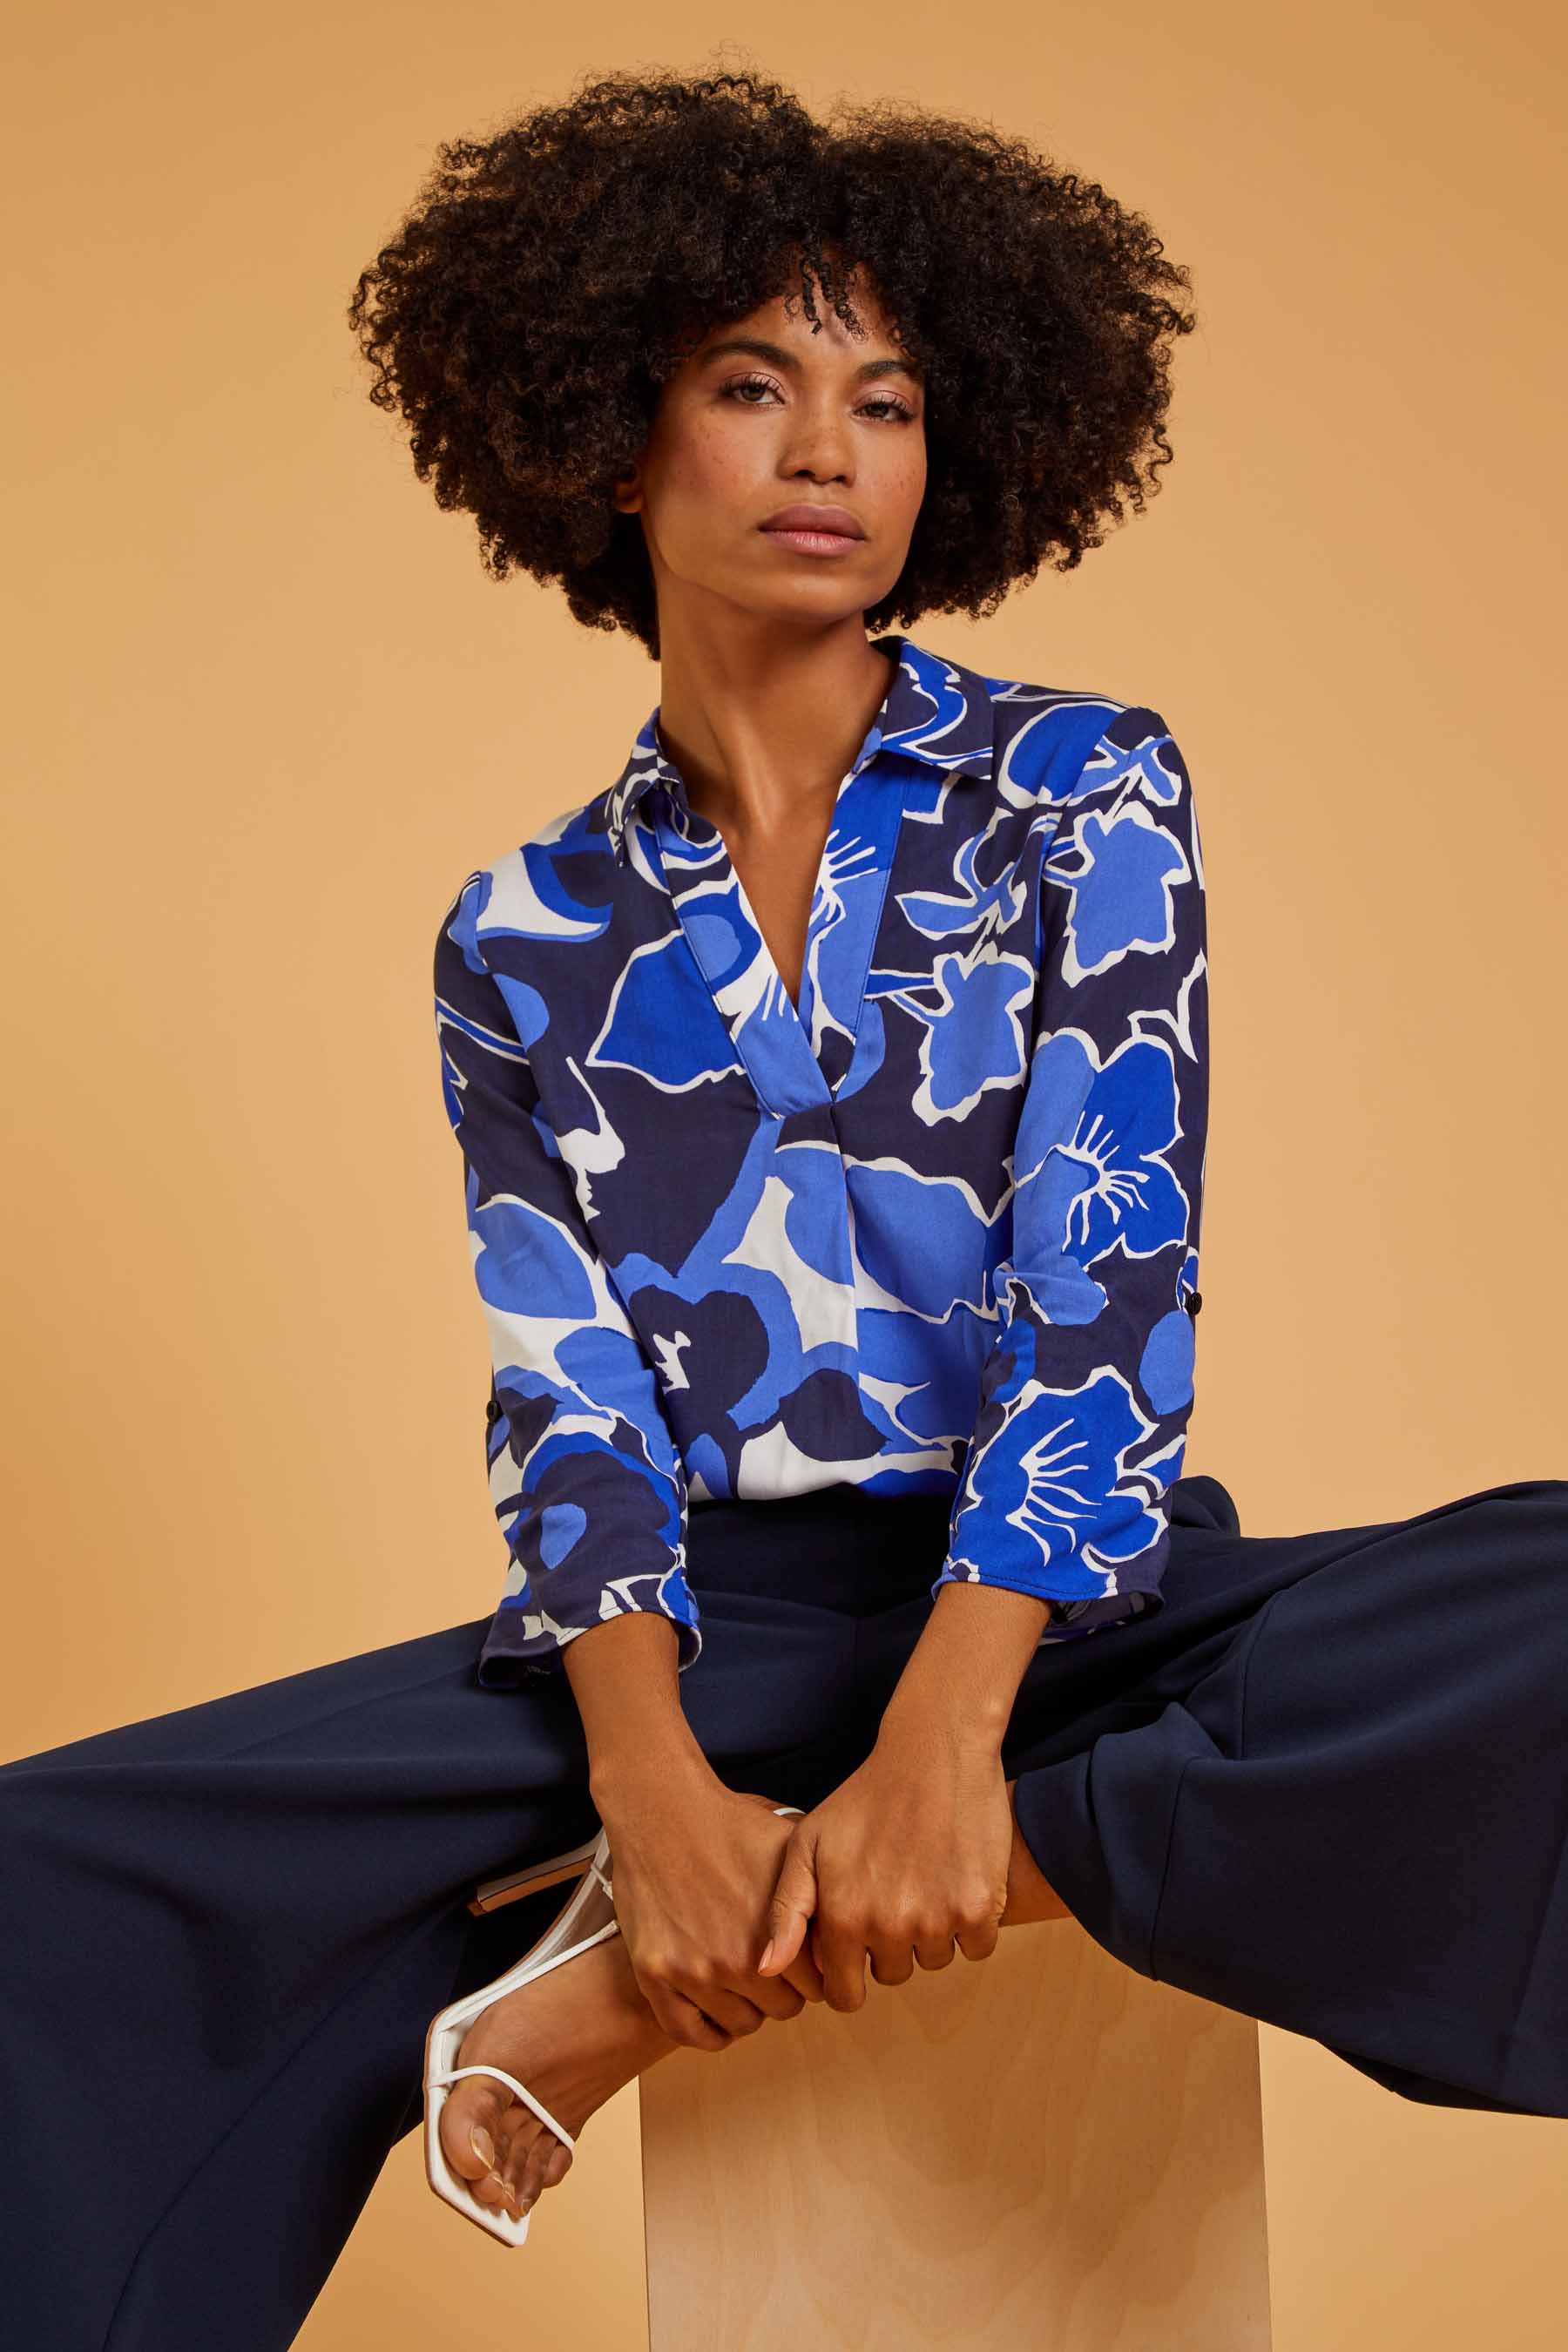 Royal Blue Floral Print Pleat Front Top, Image 2 of 6